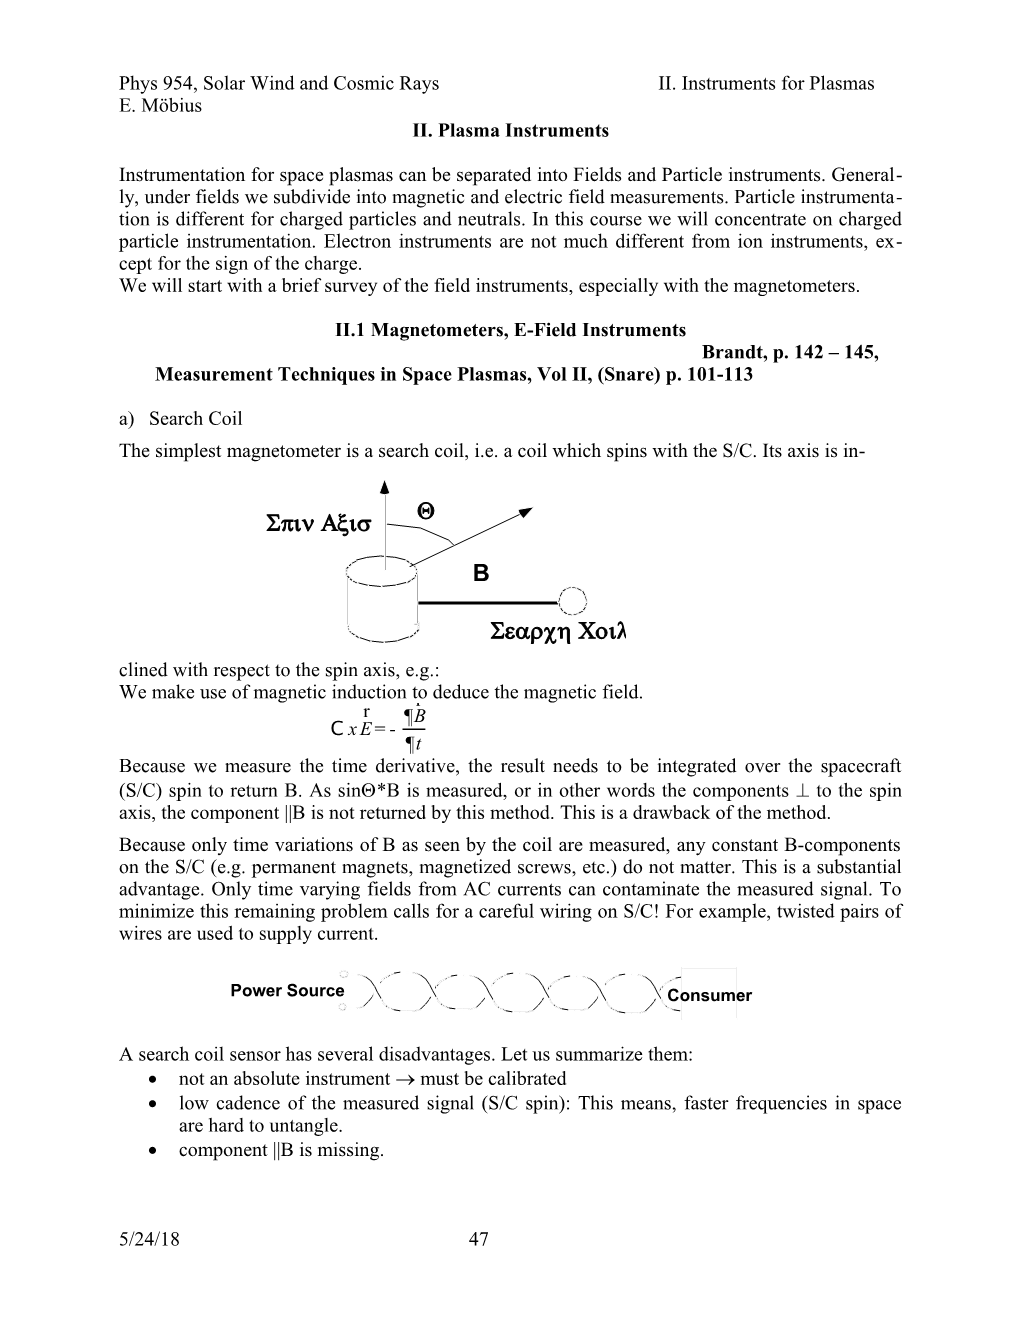 Phys 954, Solar Wind and Cosmic Rays II. Instruments for Plasmas